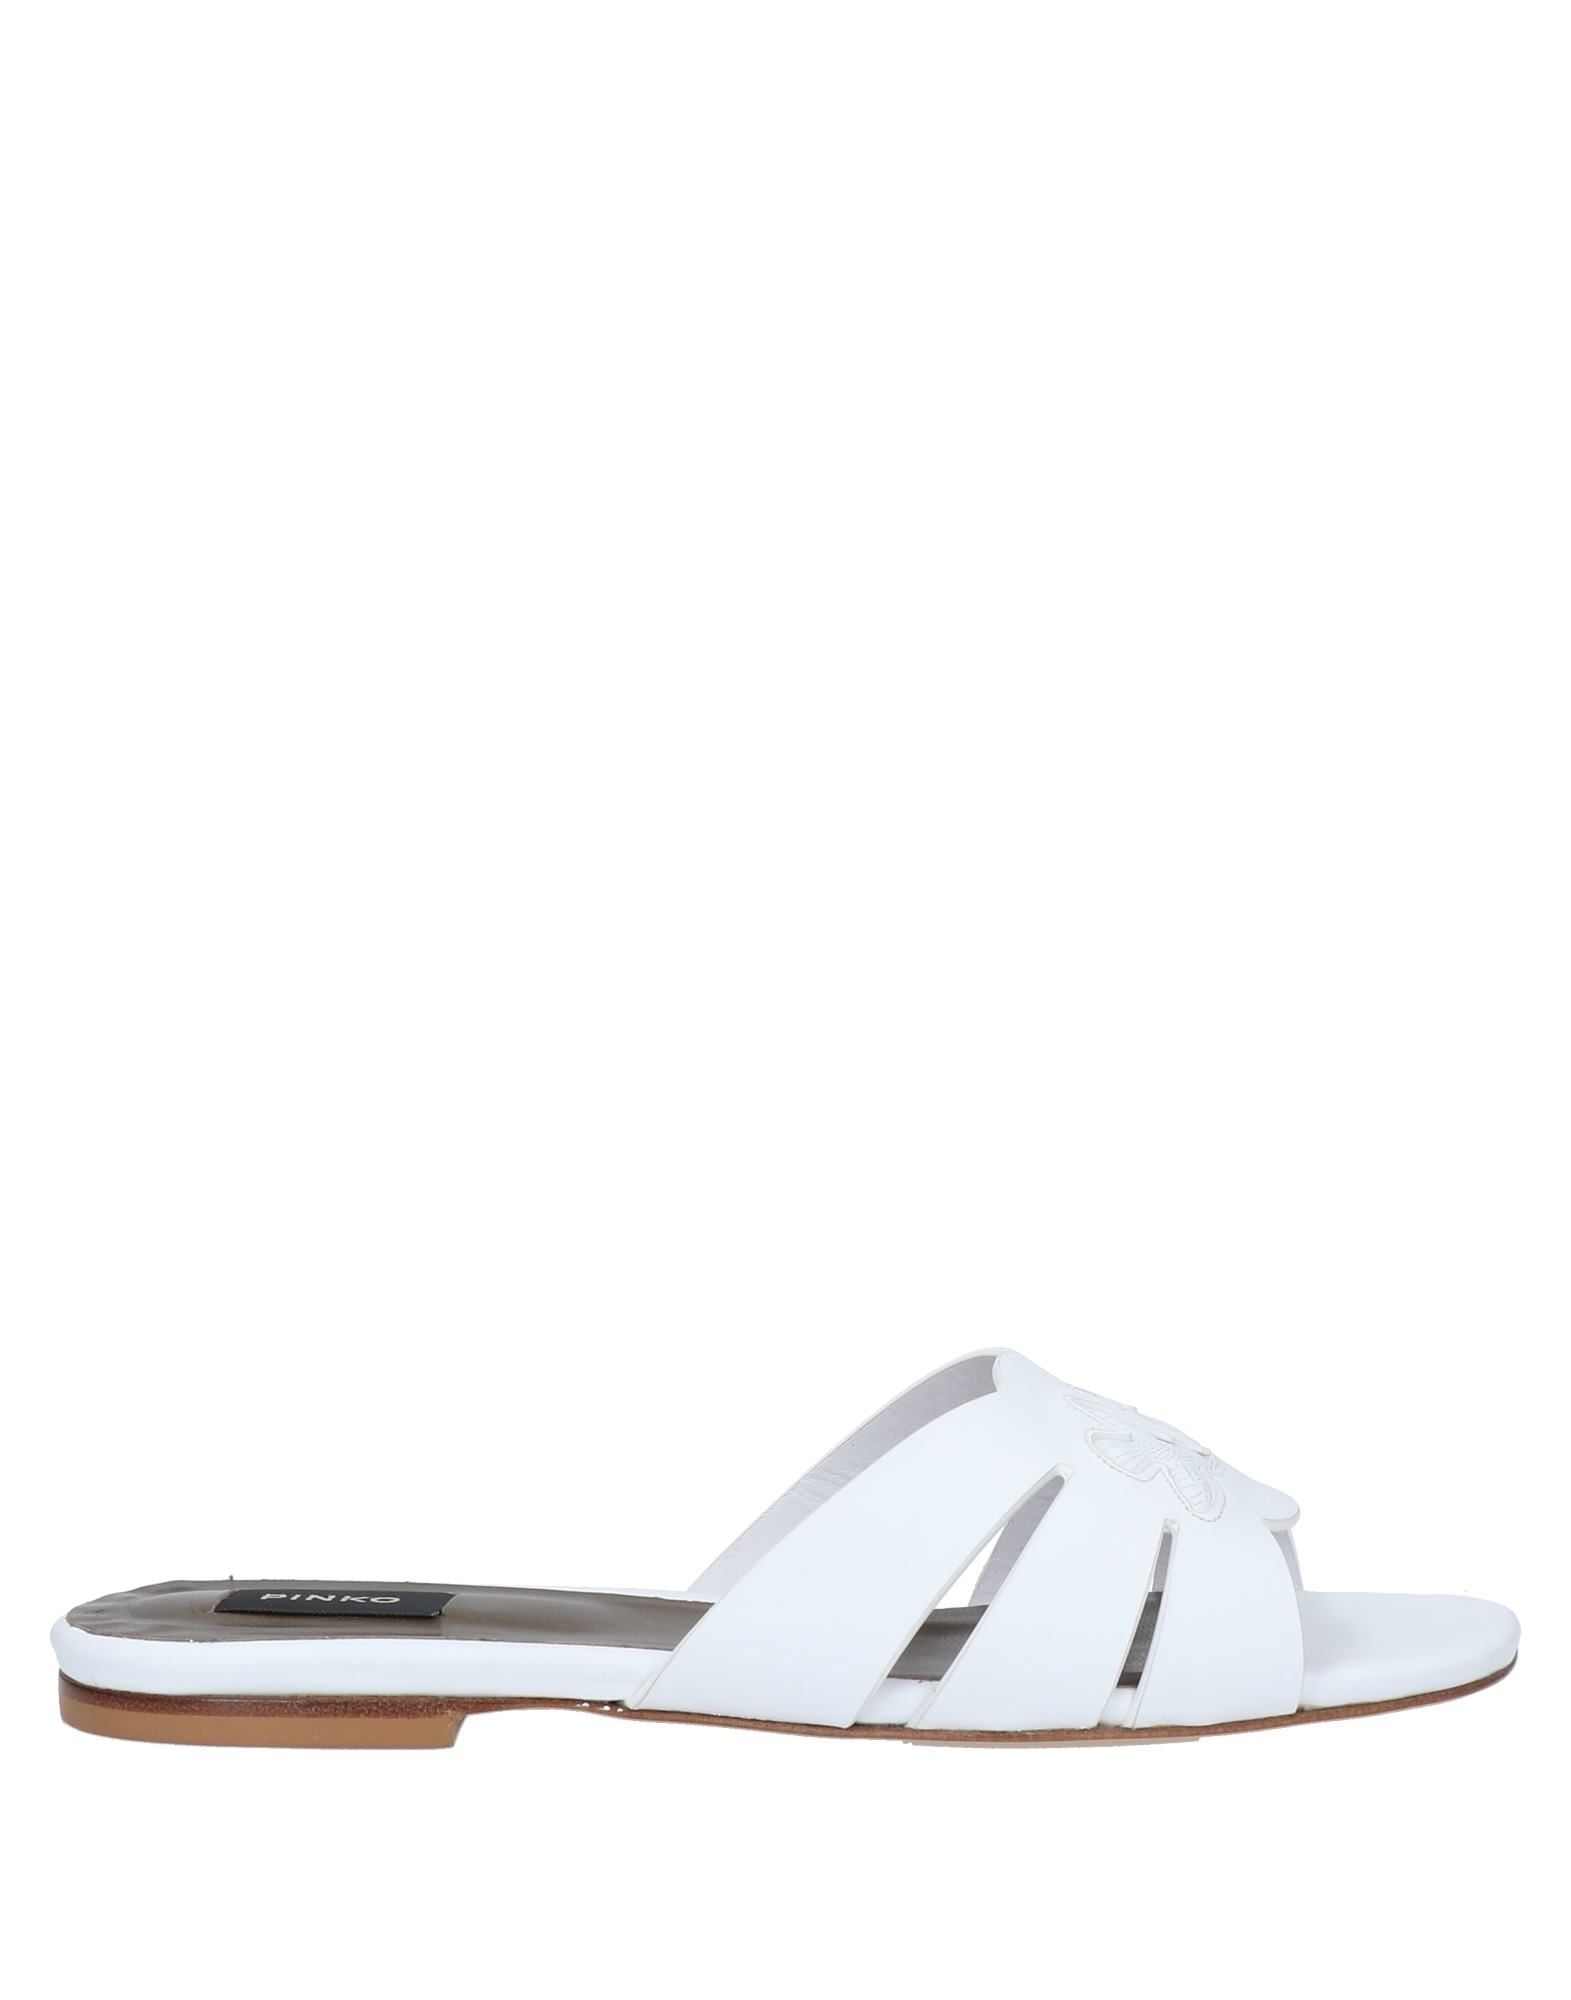 Shop Pinko Woman Sandals White Size 6 Soft Leather